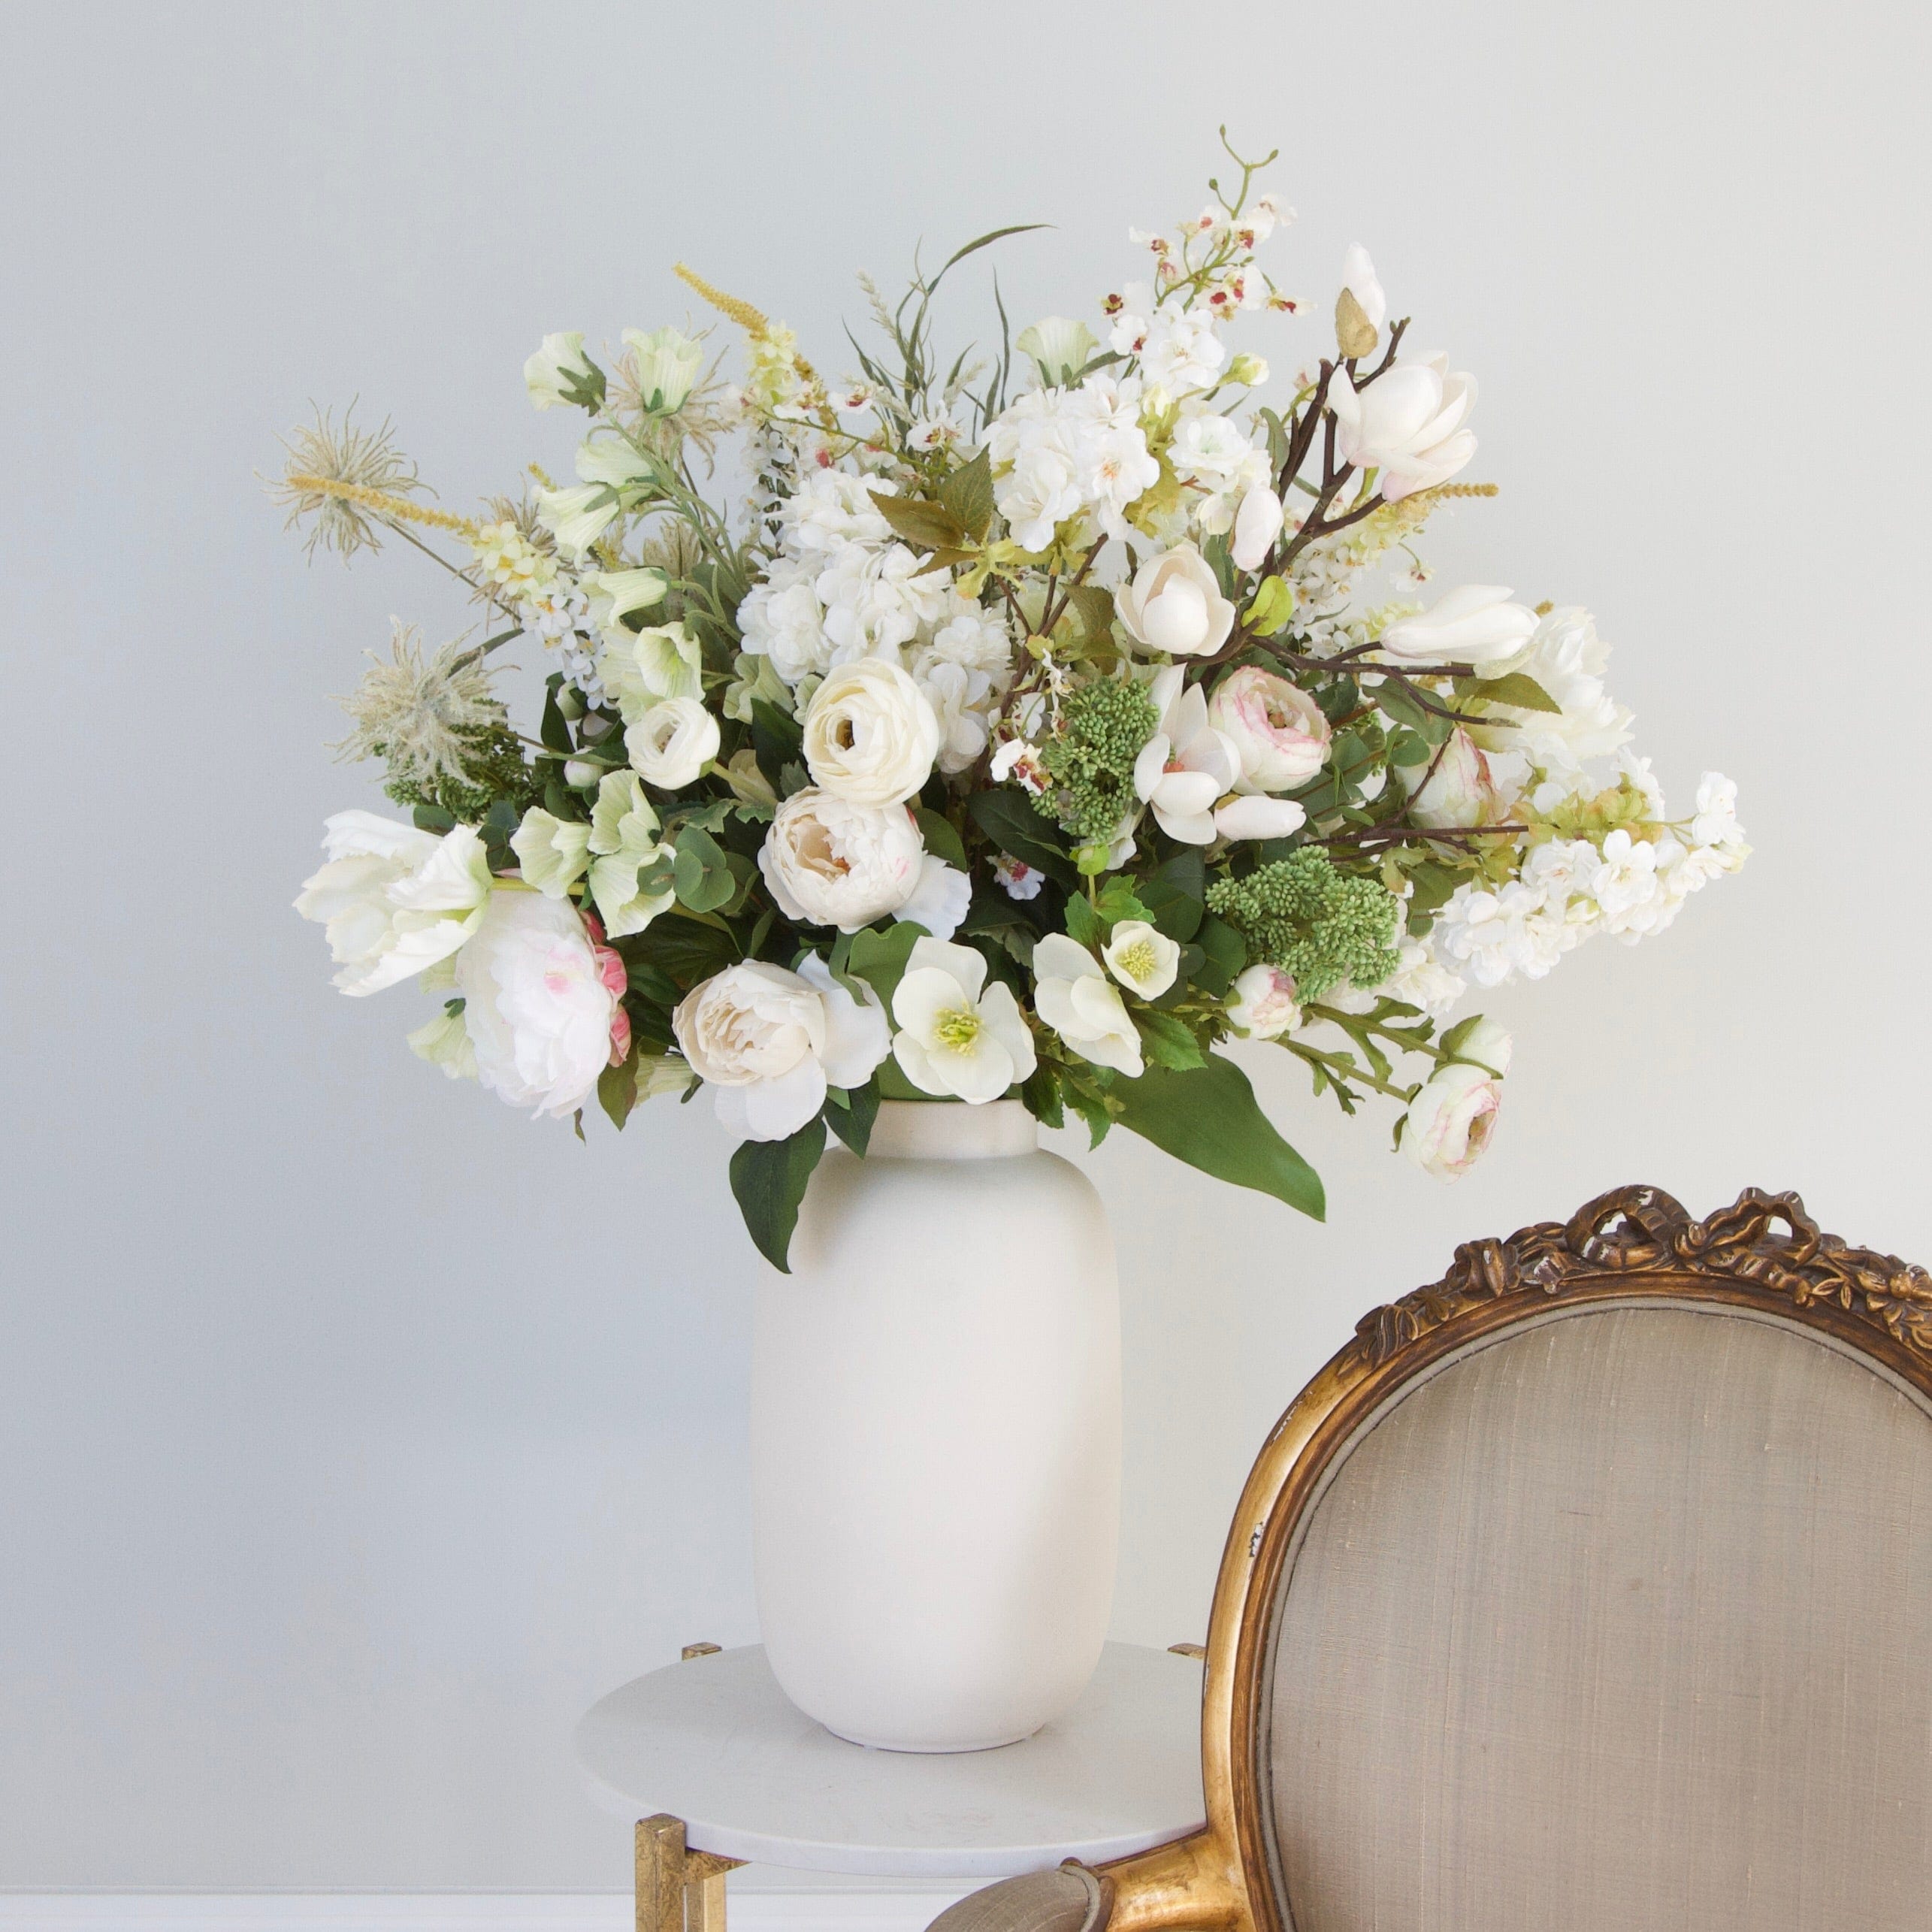 The Truth About Penny in the Vase for Your Flower Arrangements